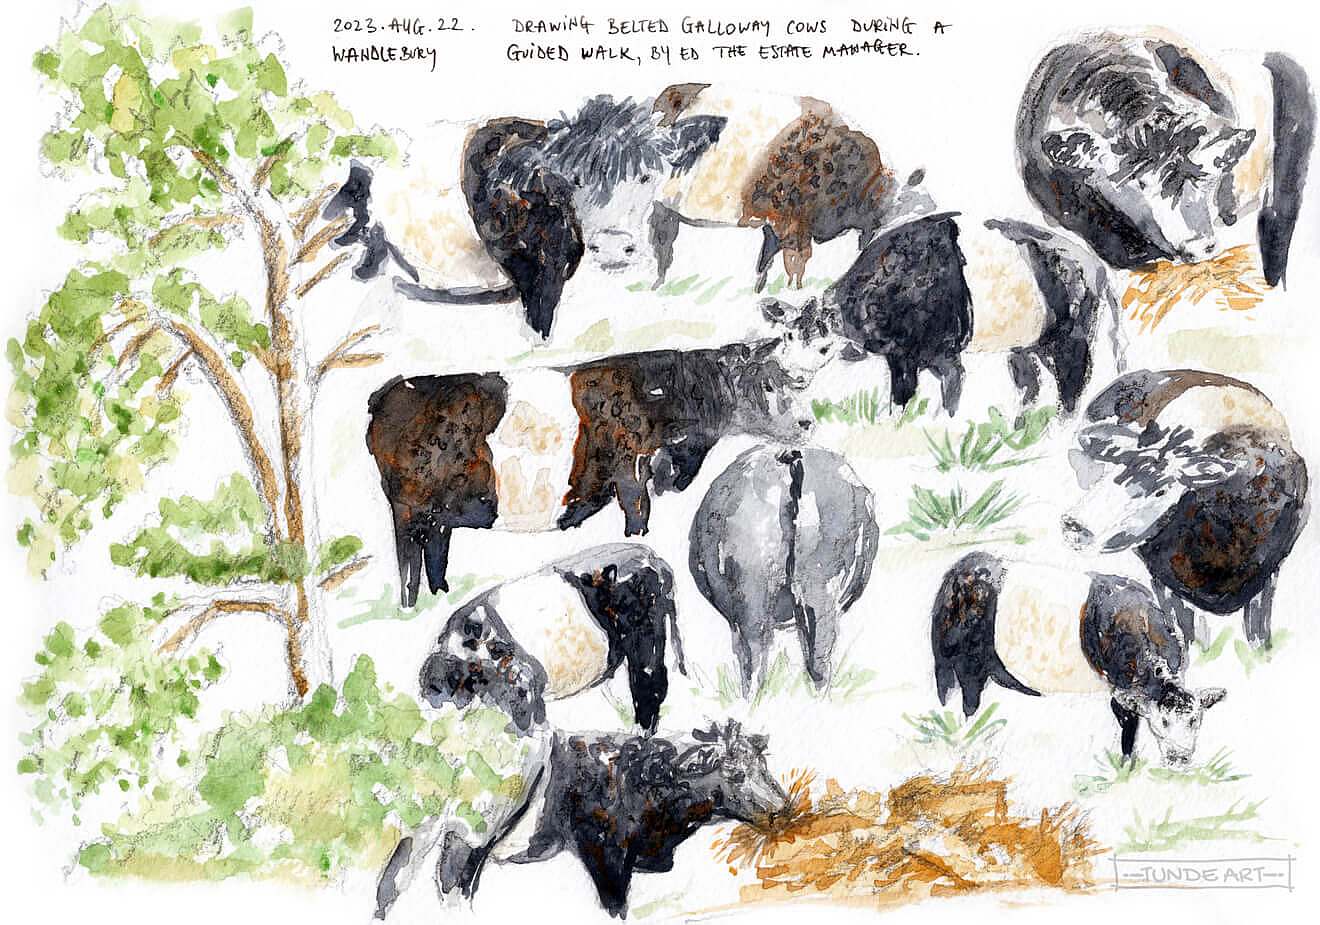 Belted Galloway Cows at Wandlebury by Tunde Szentes